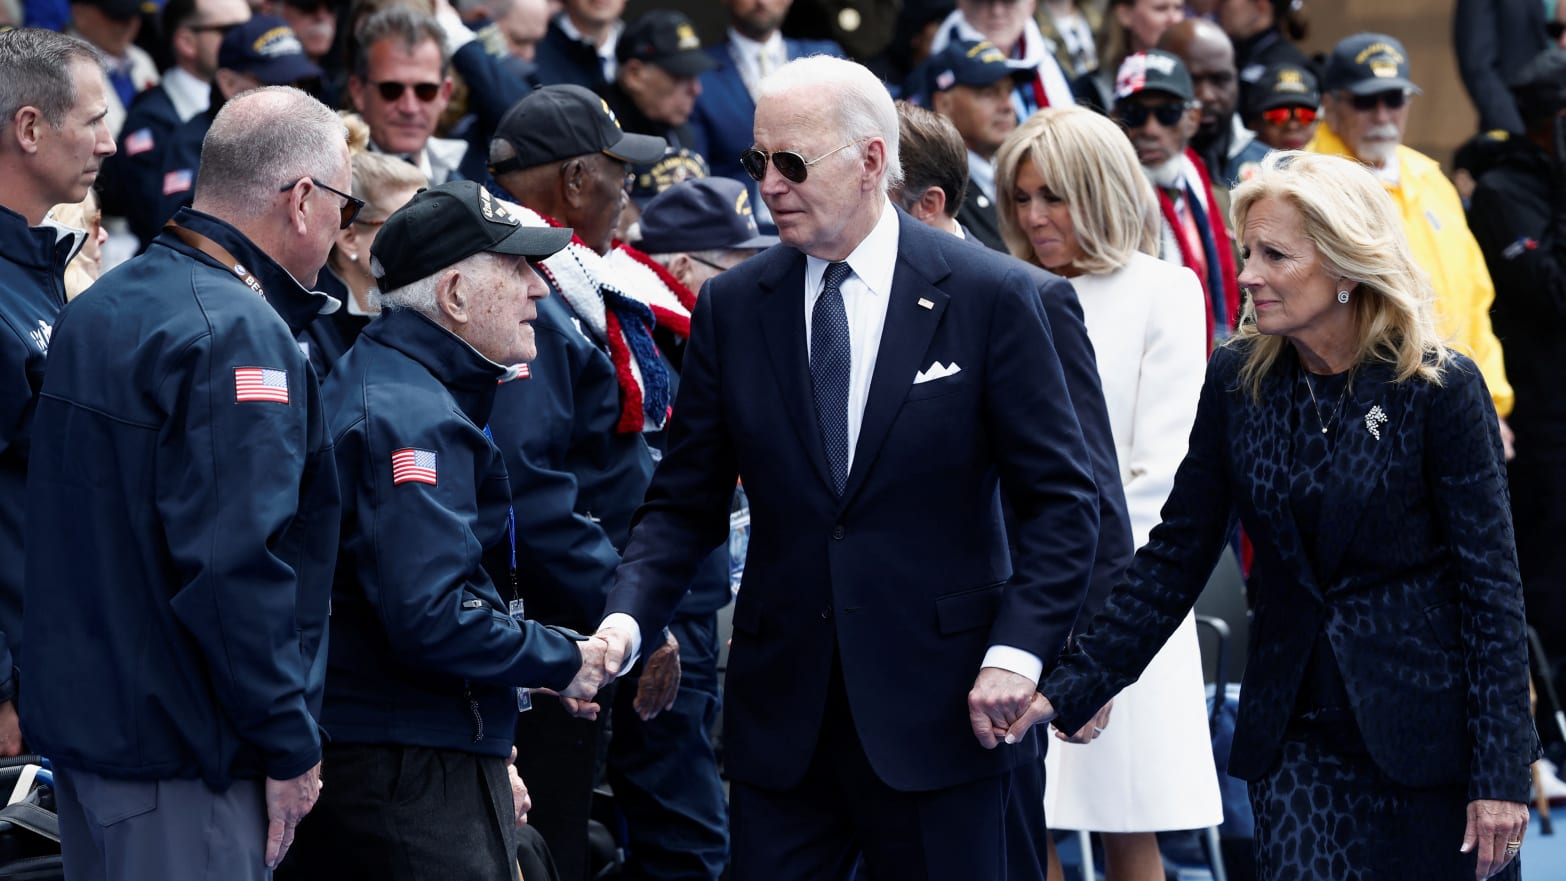 President Joe Biden and first lady Jill Biden meeting war vets at the D-Day celebration in France last month.